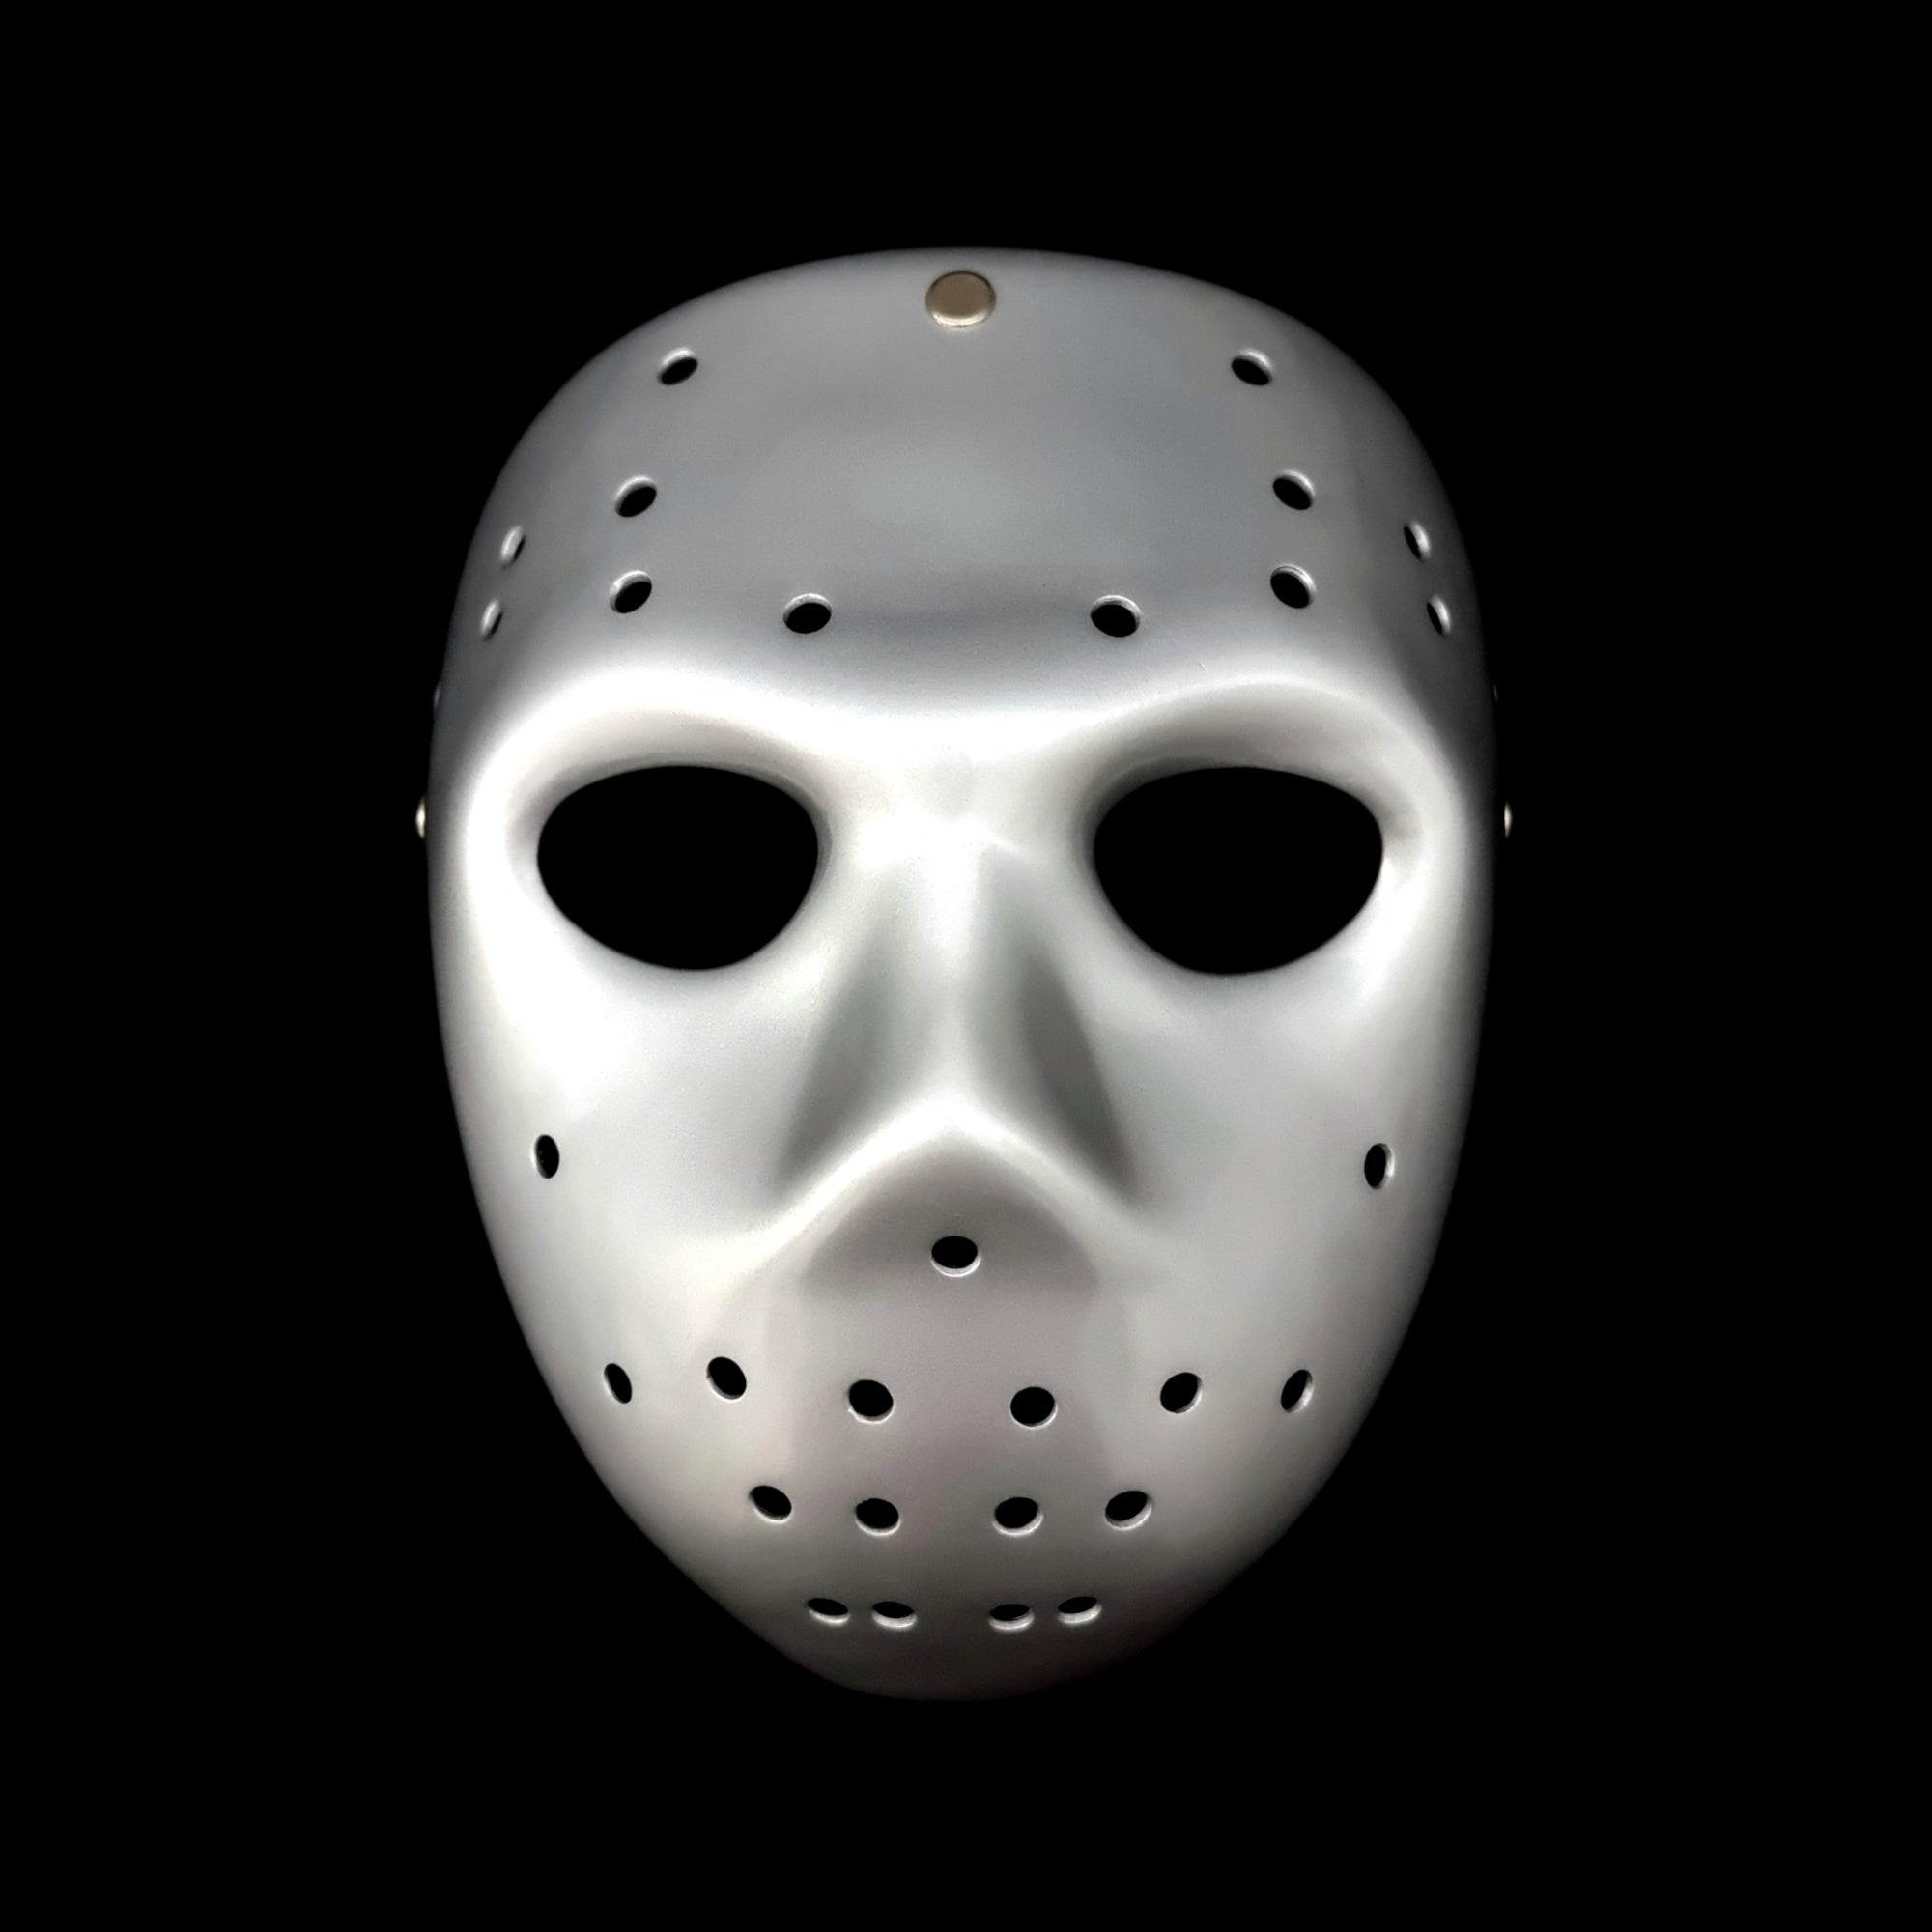 friday the 13th part 9 mask